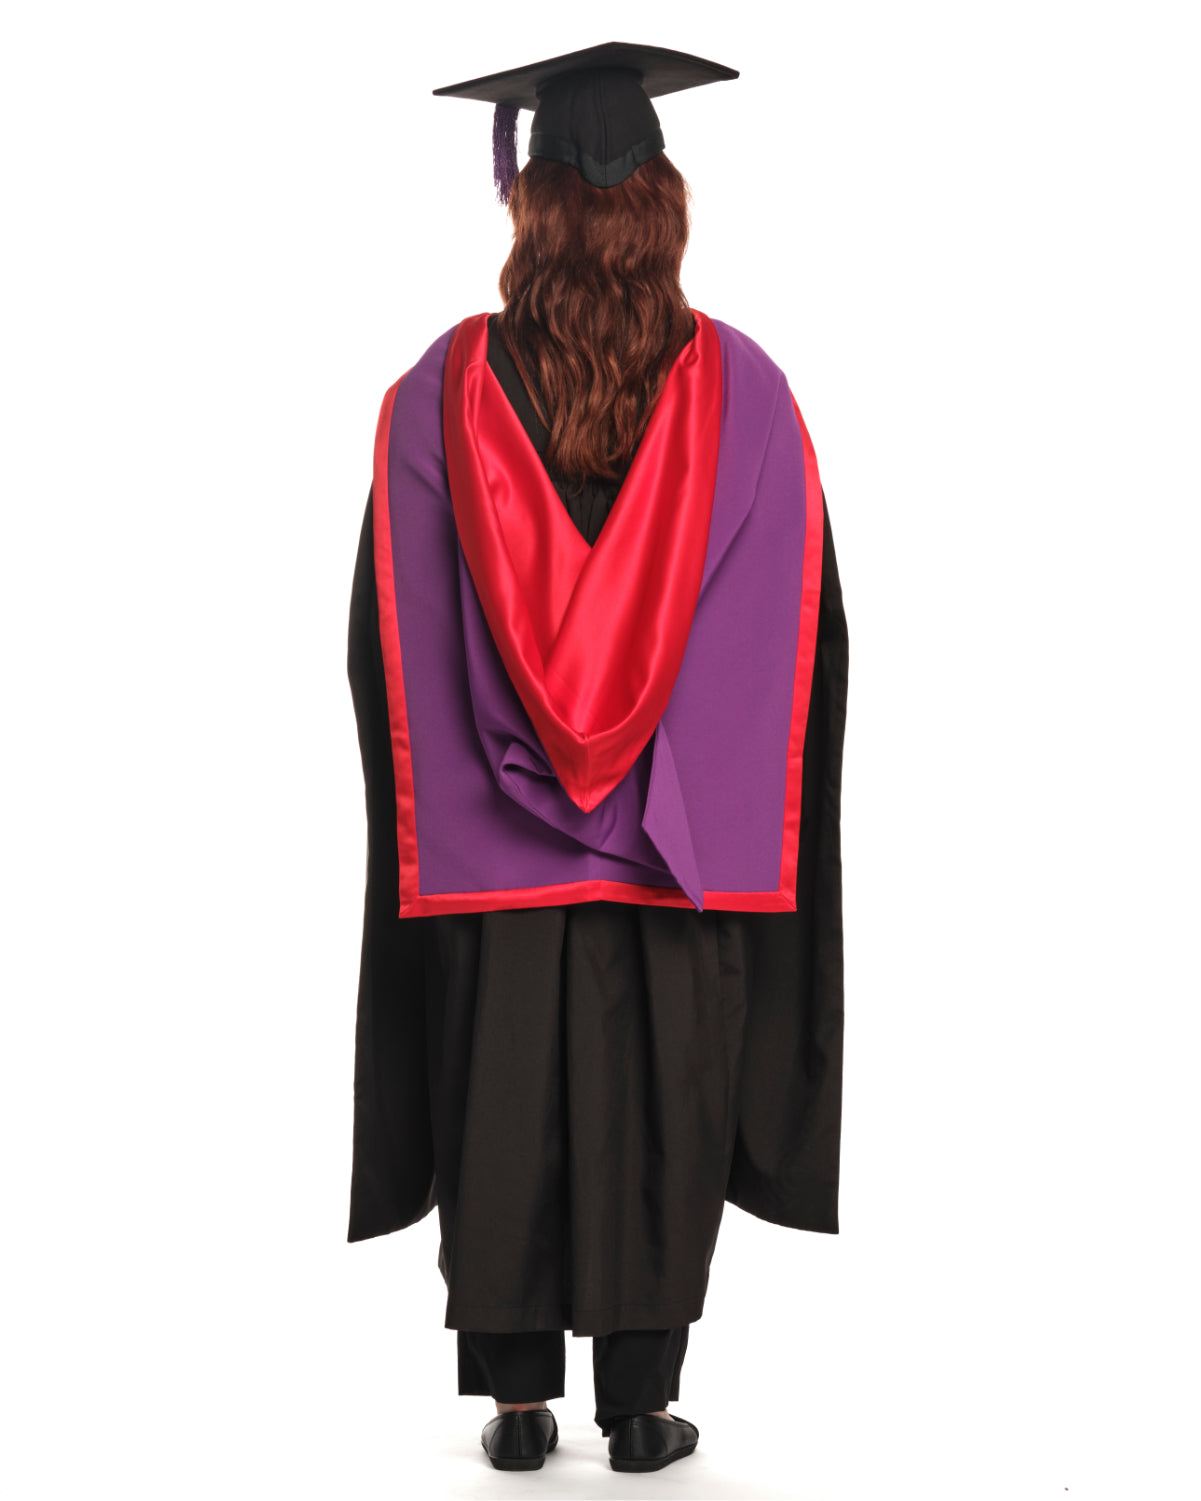 University of Portsmouth | MSc | Master of Science Gown, Cap and Hood Set